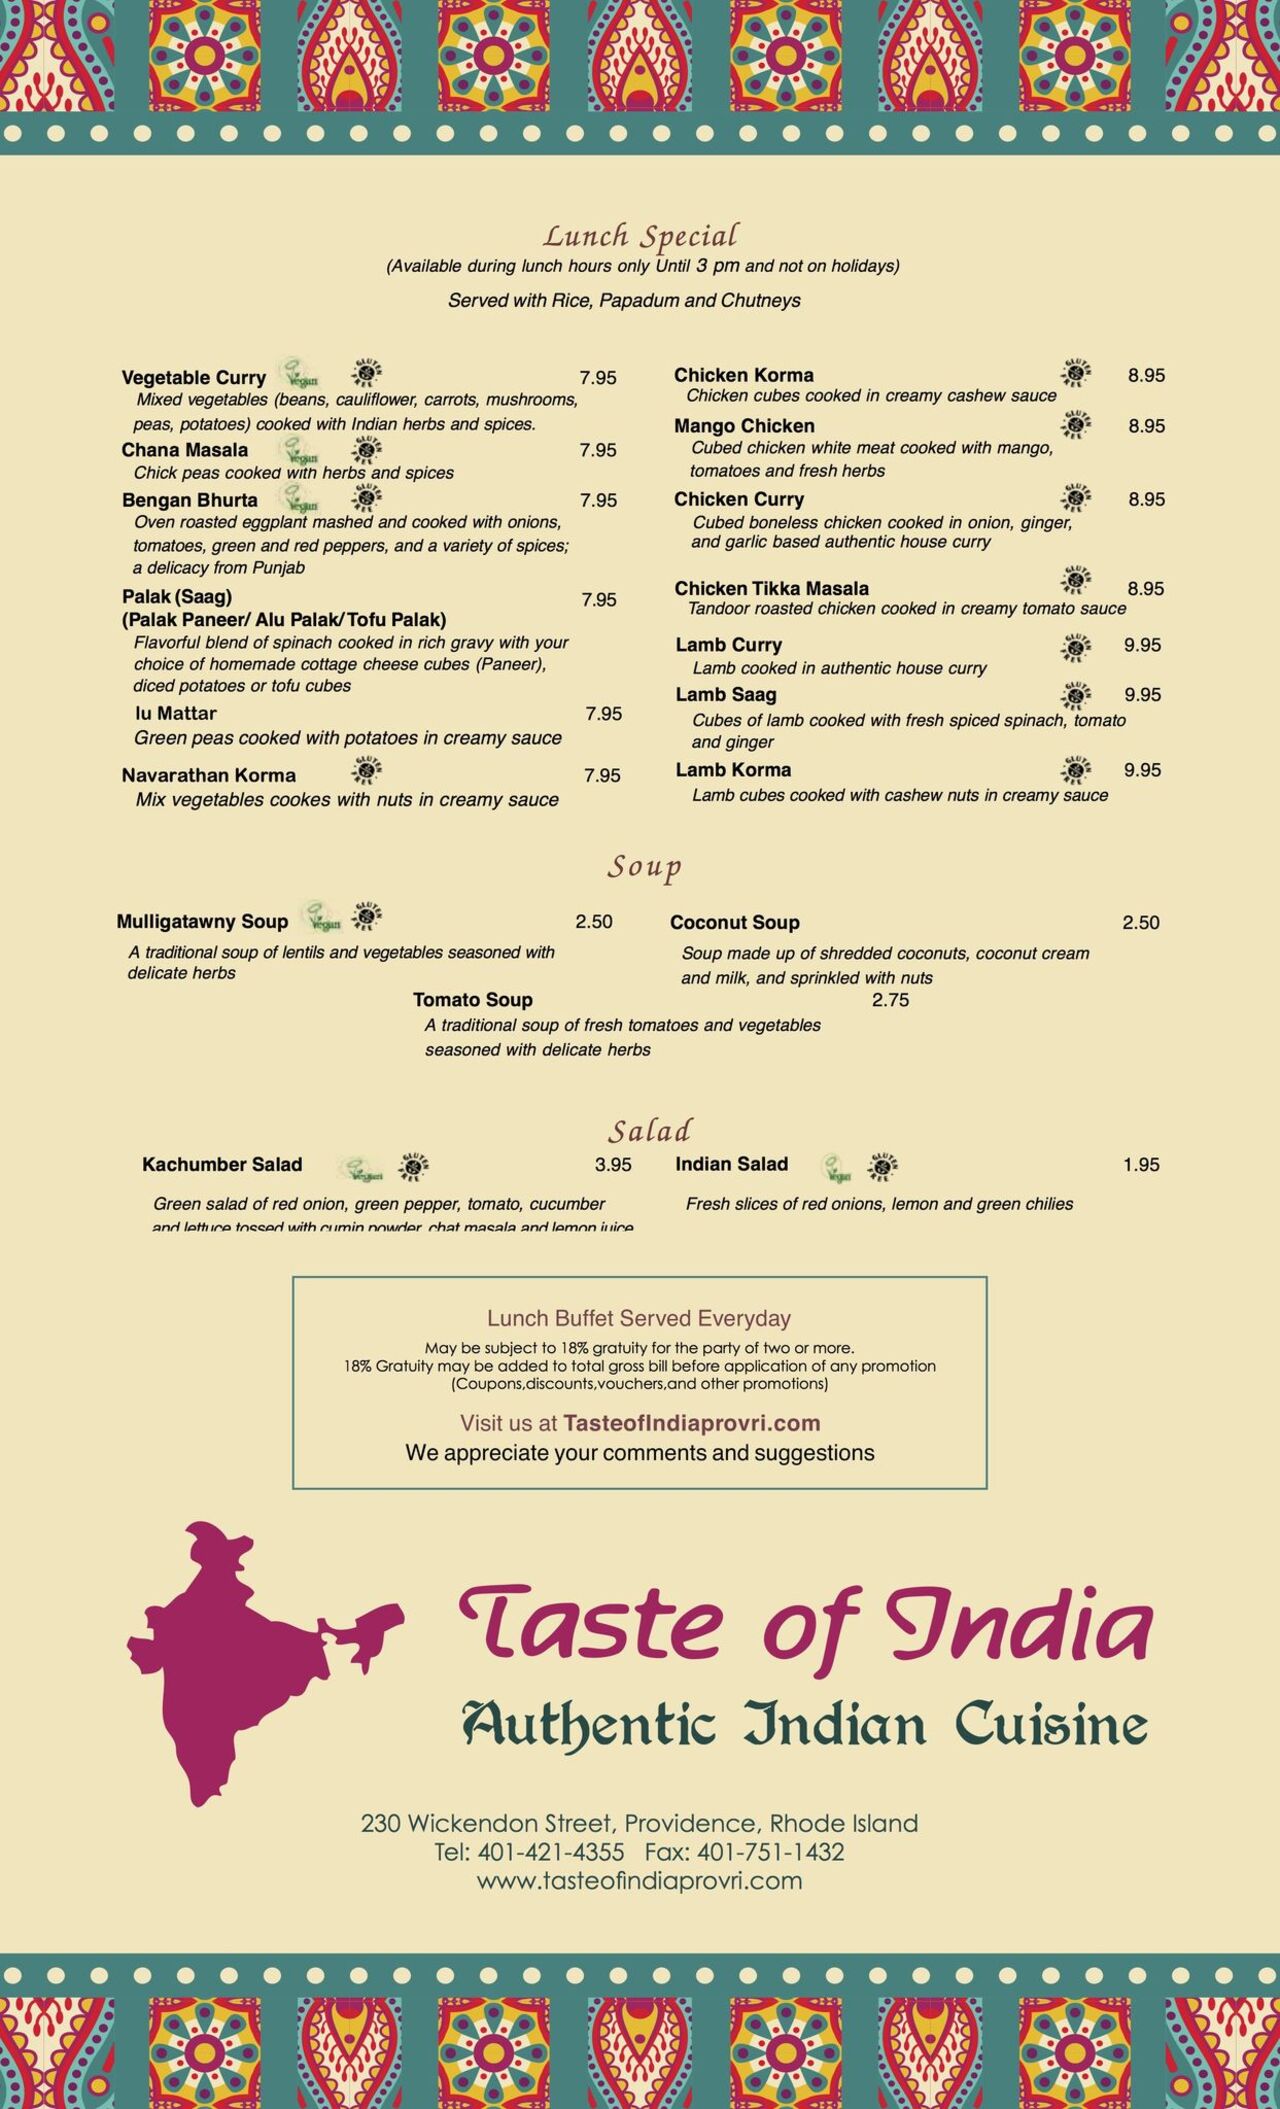 A photo of Taste of India